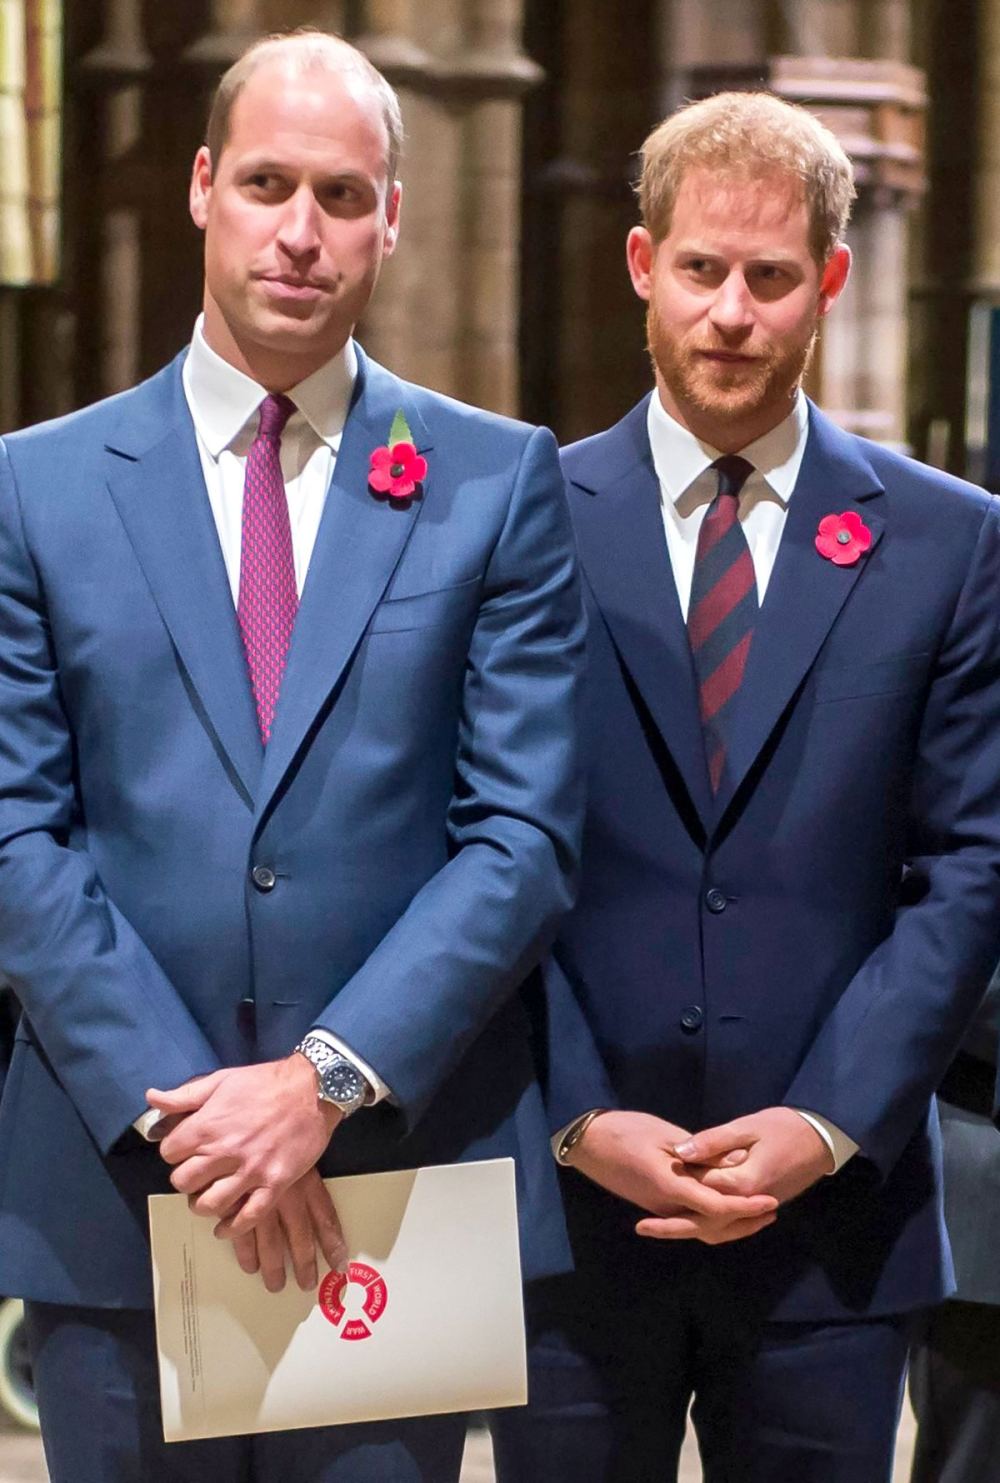 Prince Harry and Prince William Haven’t ‘Buried the Hatchet’ Yet